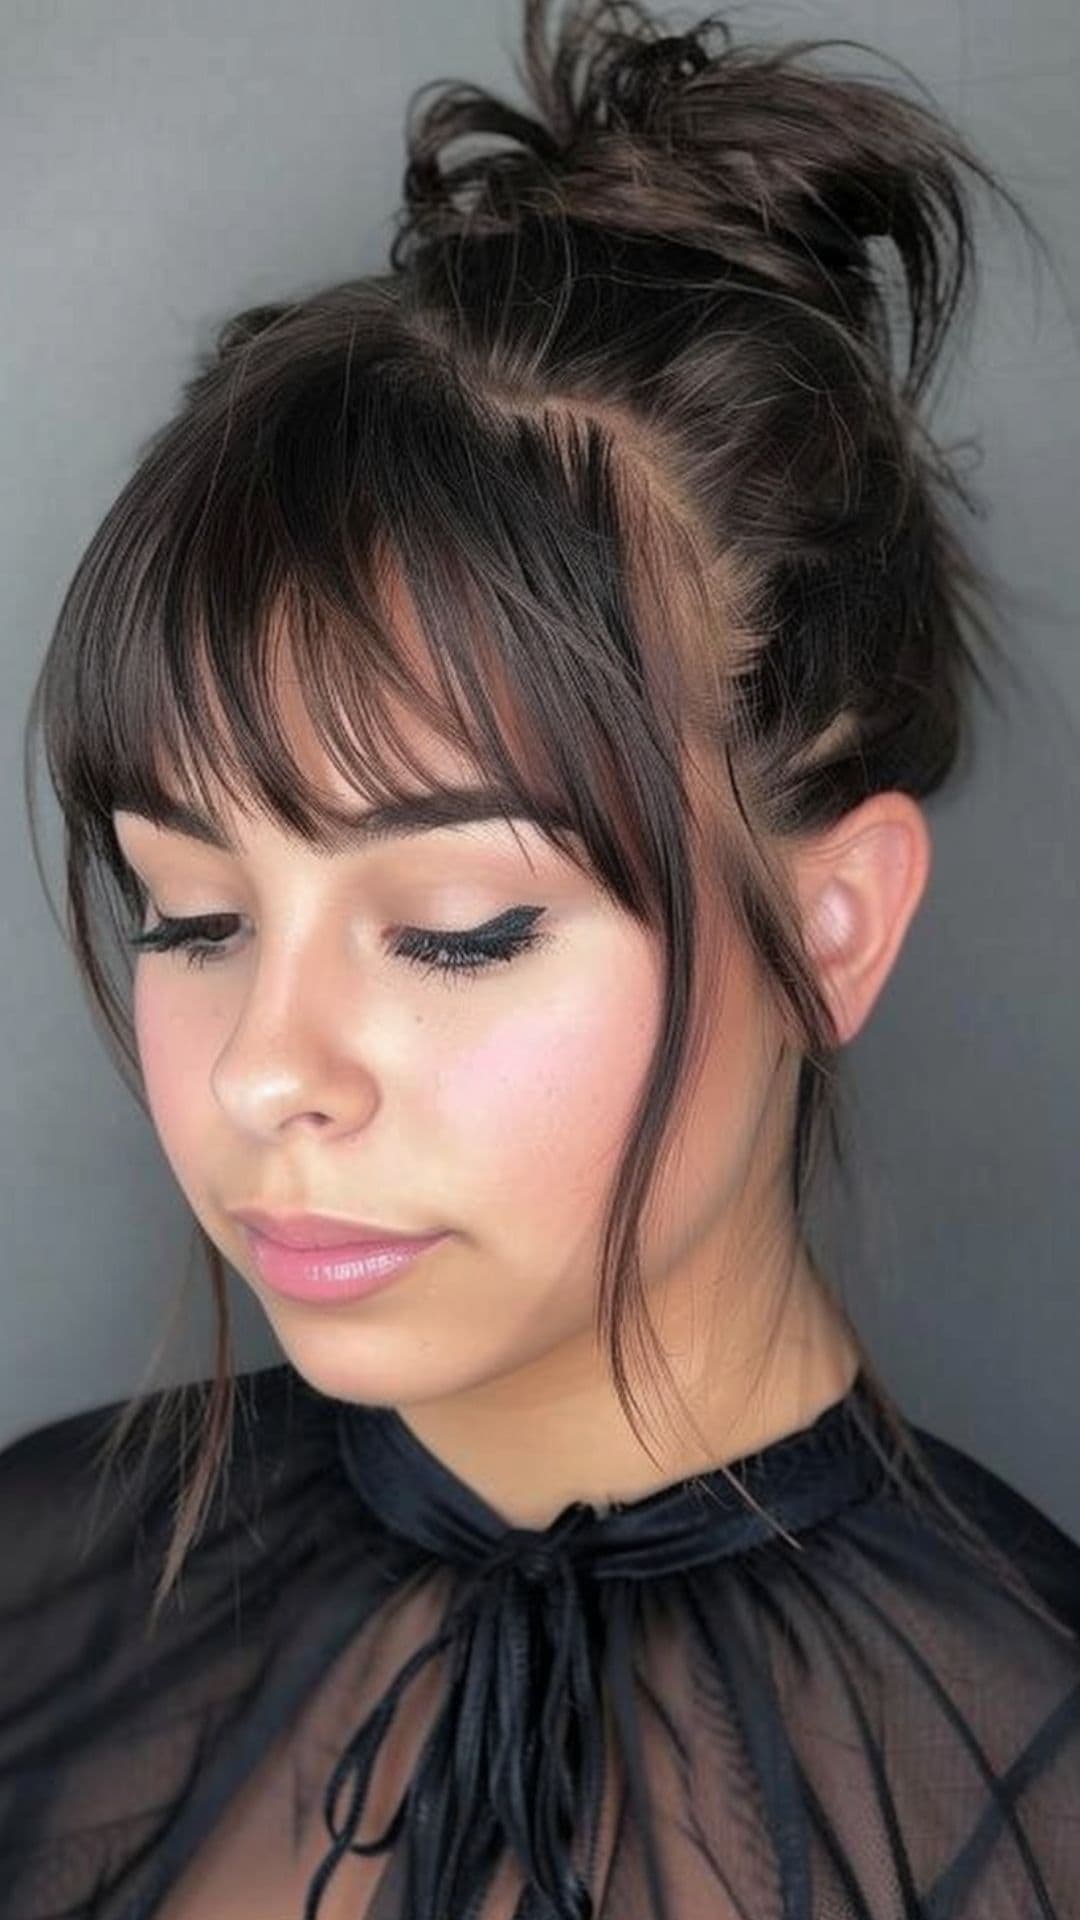 A round-faced woman modelling a messy bun with bangs.